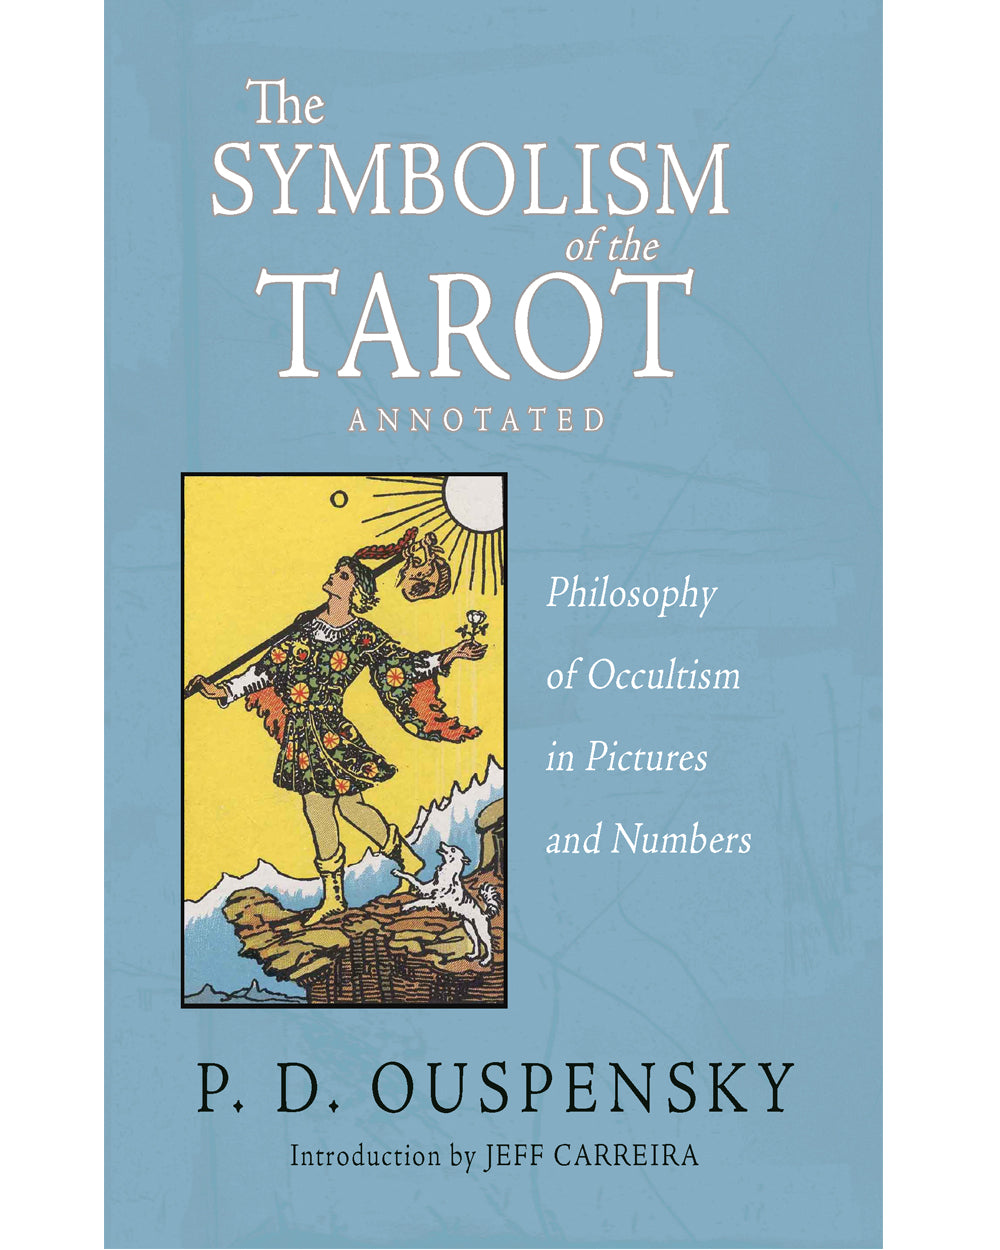 The Symbolism of the Tarot (Annotated): Philosophy of Occultism in Pictures and Numbers